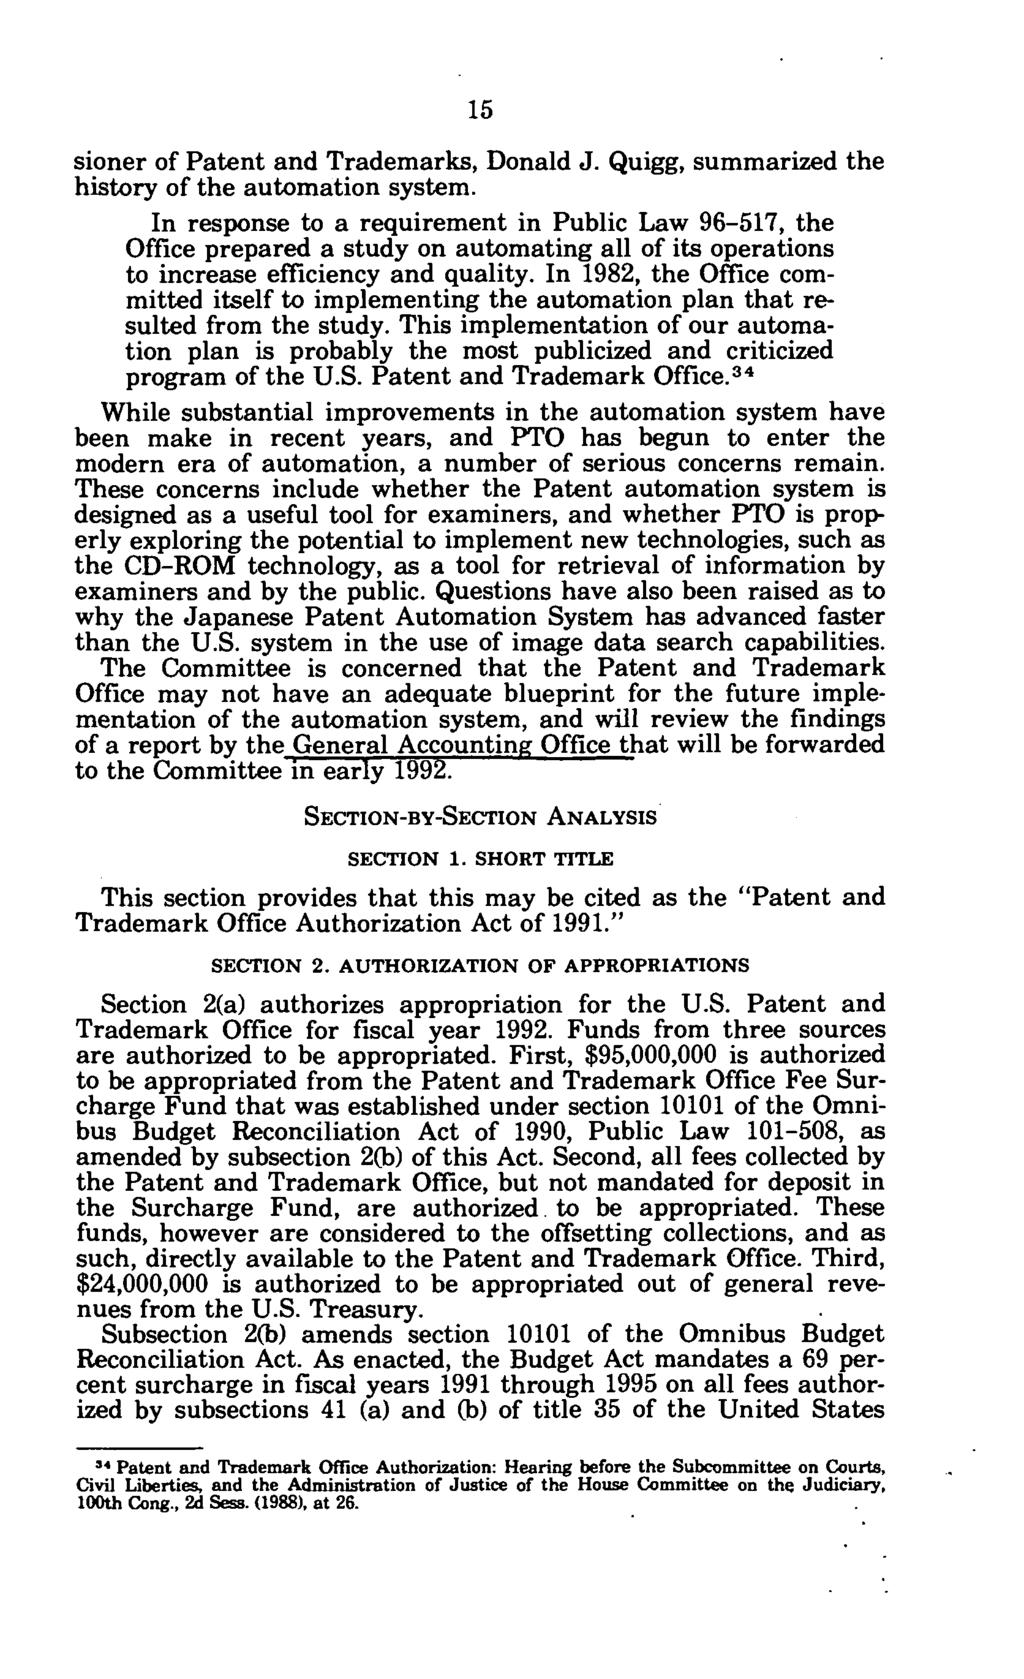 15 sioner of Patent and Trademarks, Donald J. Quigg, summarized the history of the automation system.